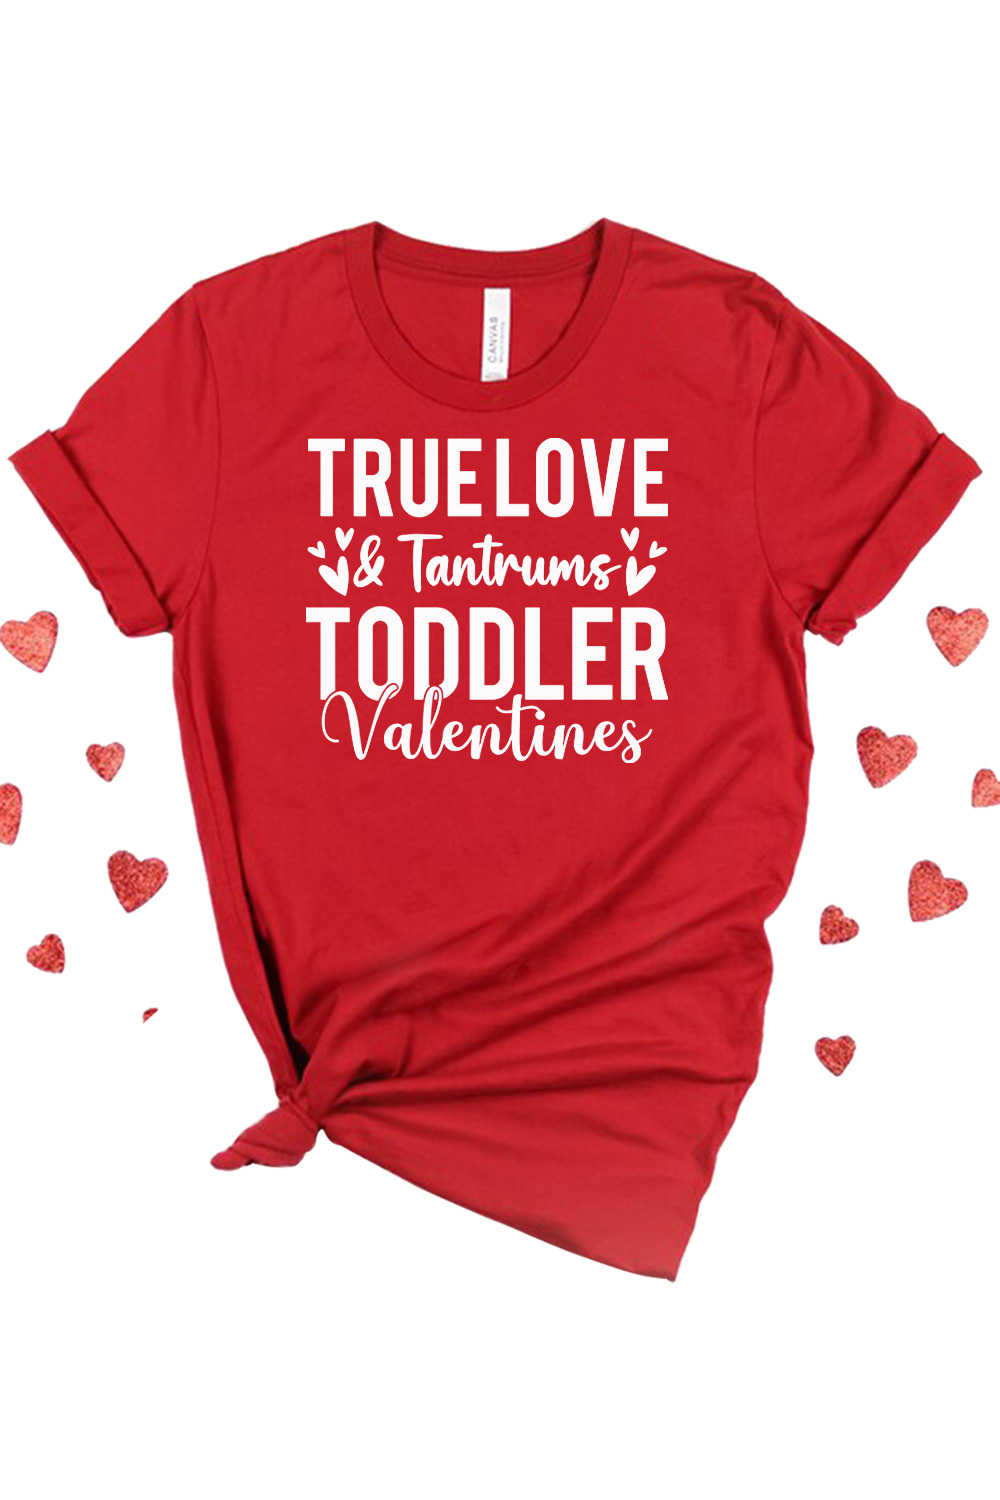 Picture of a T-shirt with gorgeous True Love & Tantrums Toddler Valentines slogan